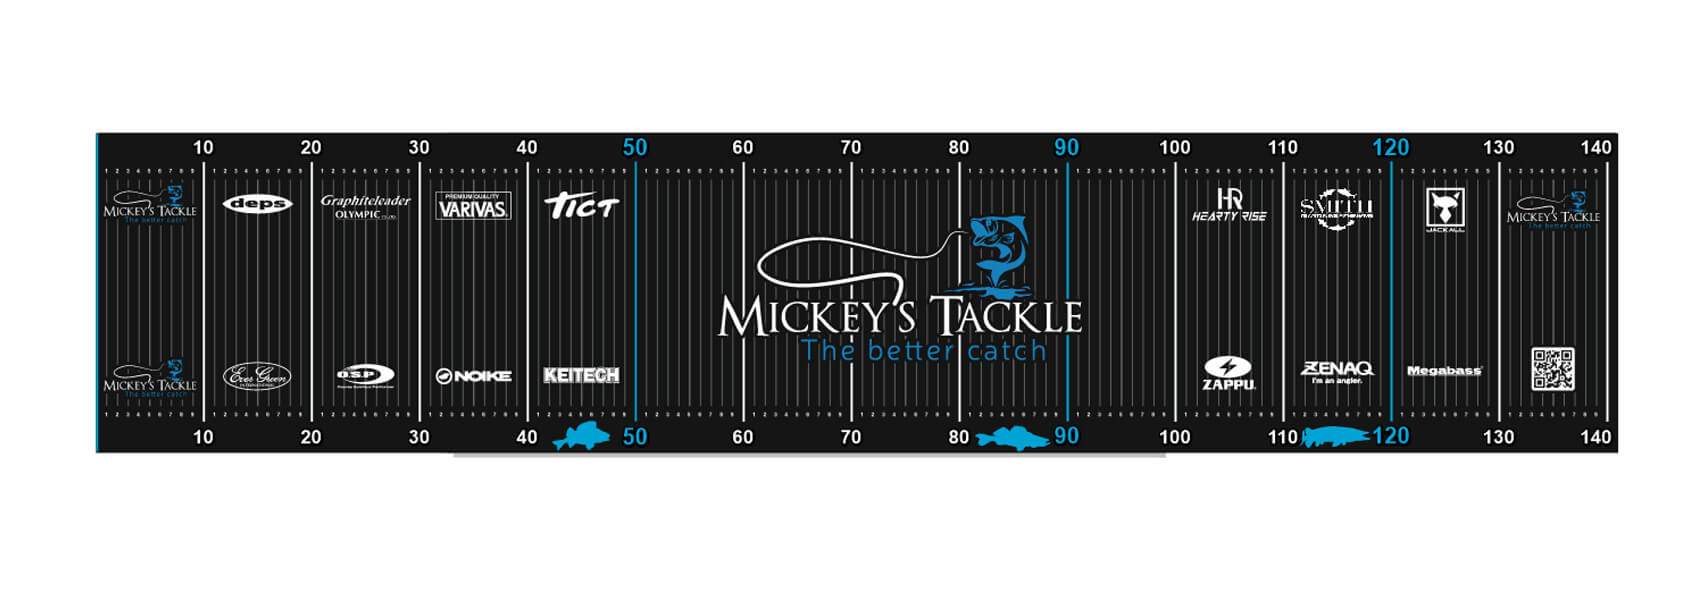 Mickeys Tackle Massband 140 - The Better Catch